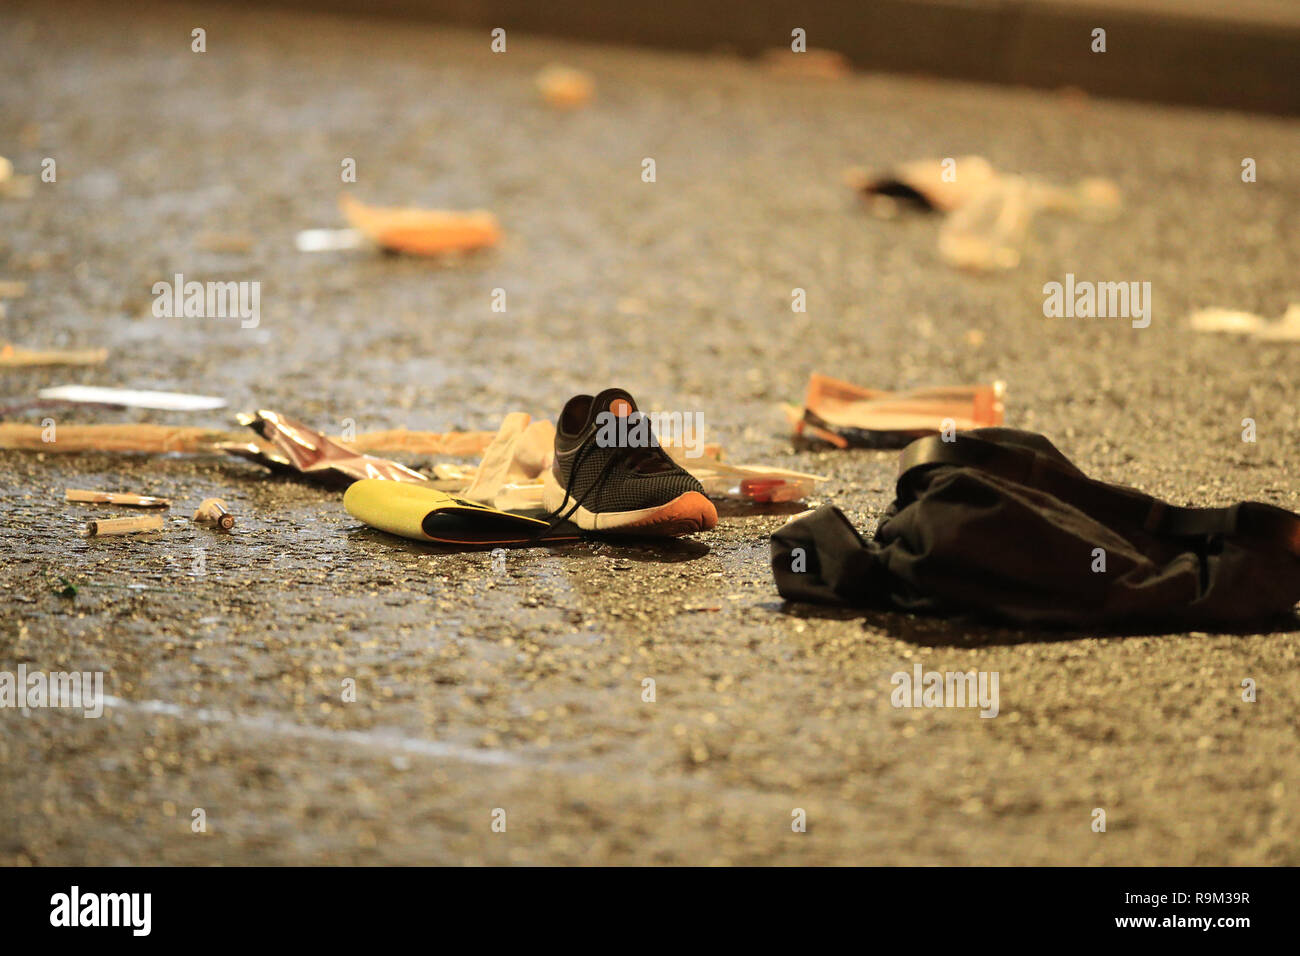 A shoe, clothing and medical equipment lie on the road at the scene of an accident on Scotland Road near the Wallasey Tunnel in Liverpool where a man has died after being hit by a police car on Christmas night. Stock Photo